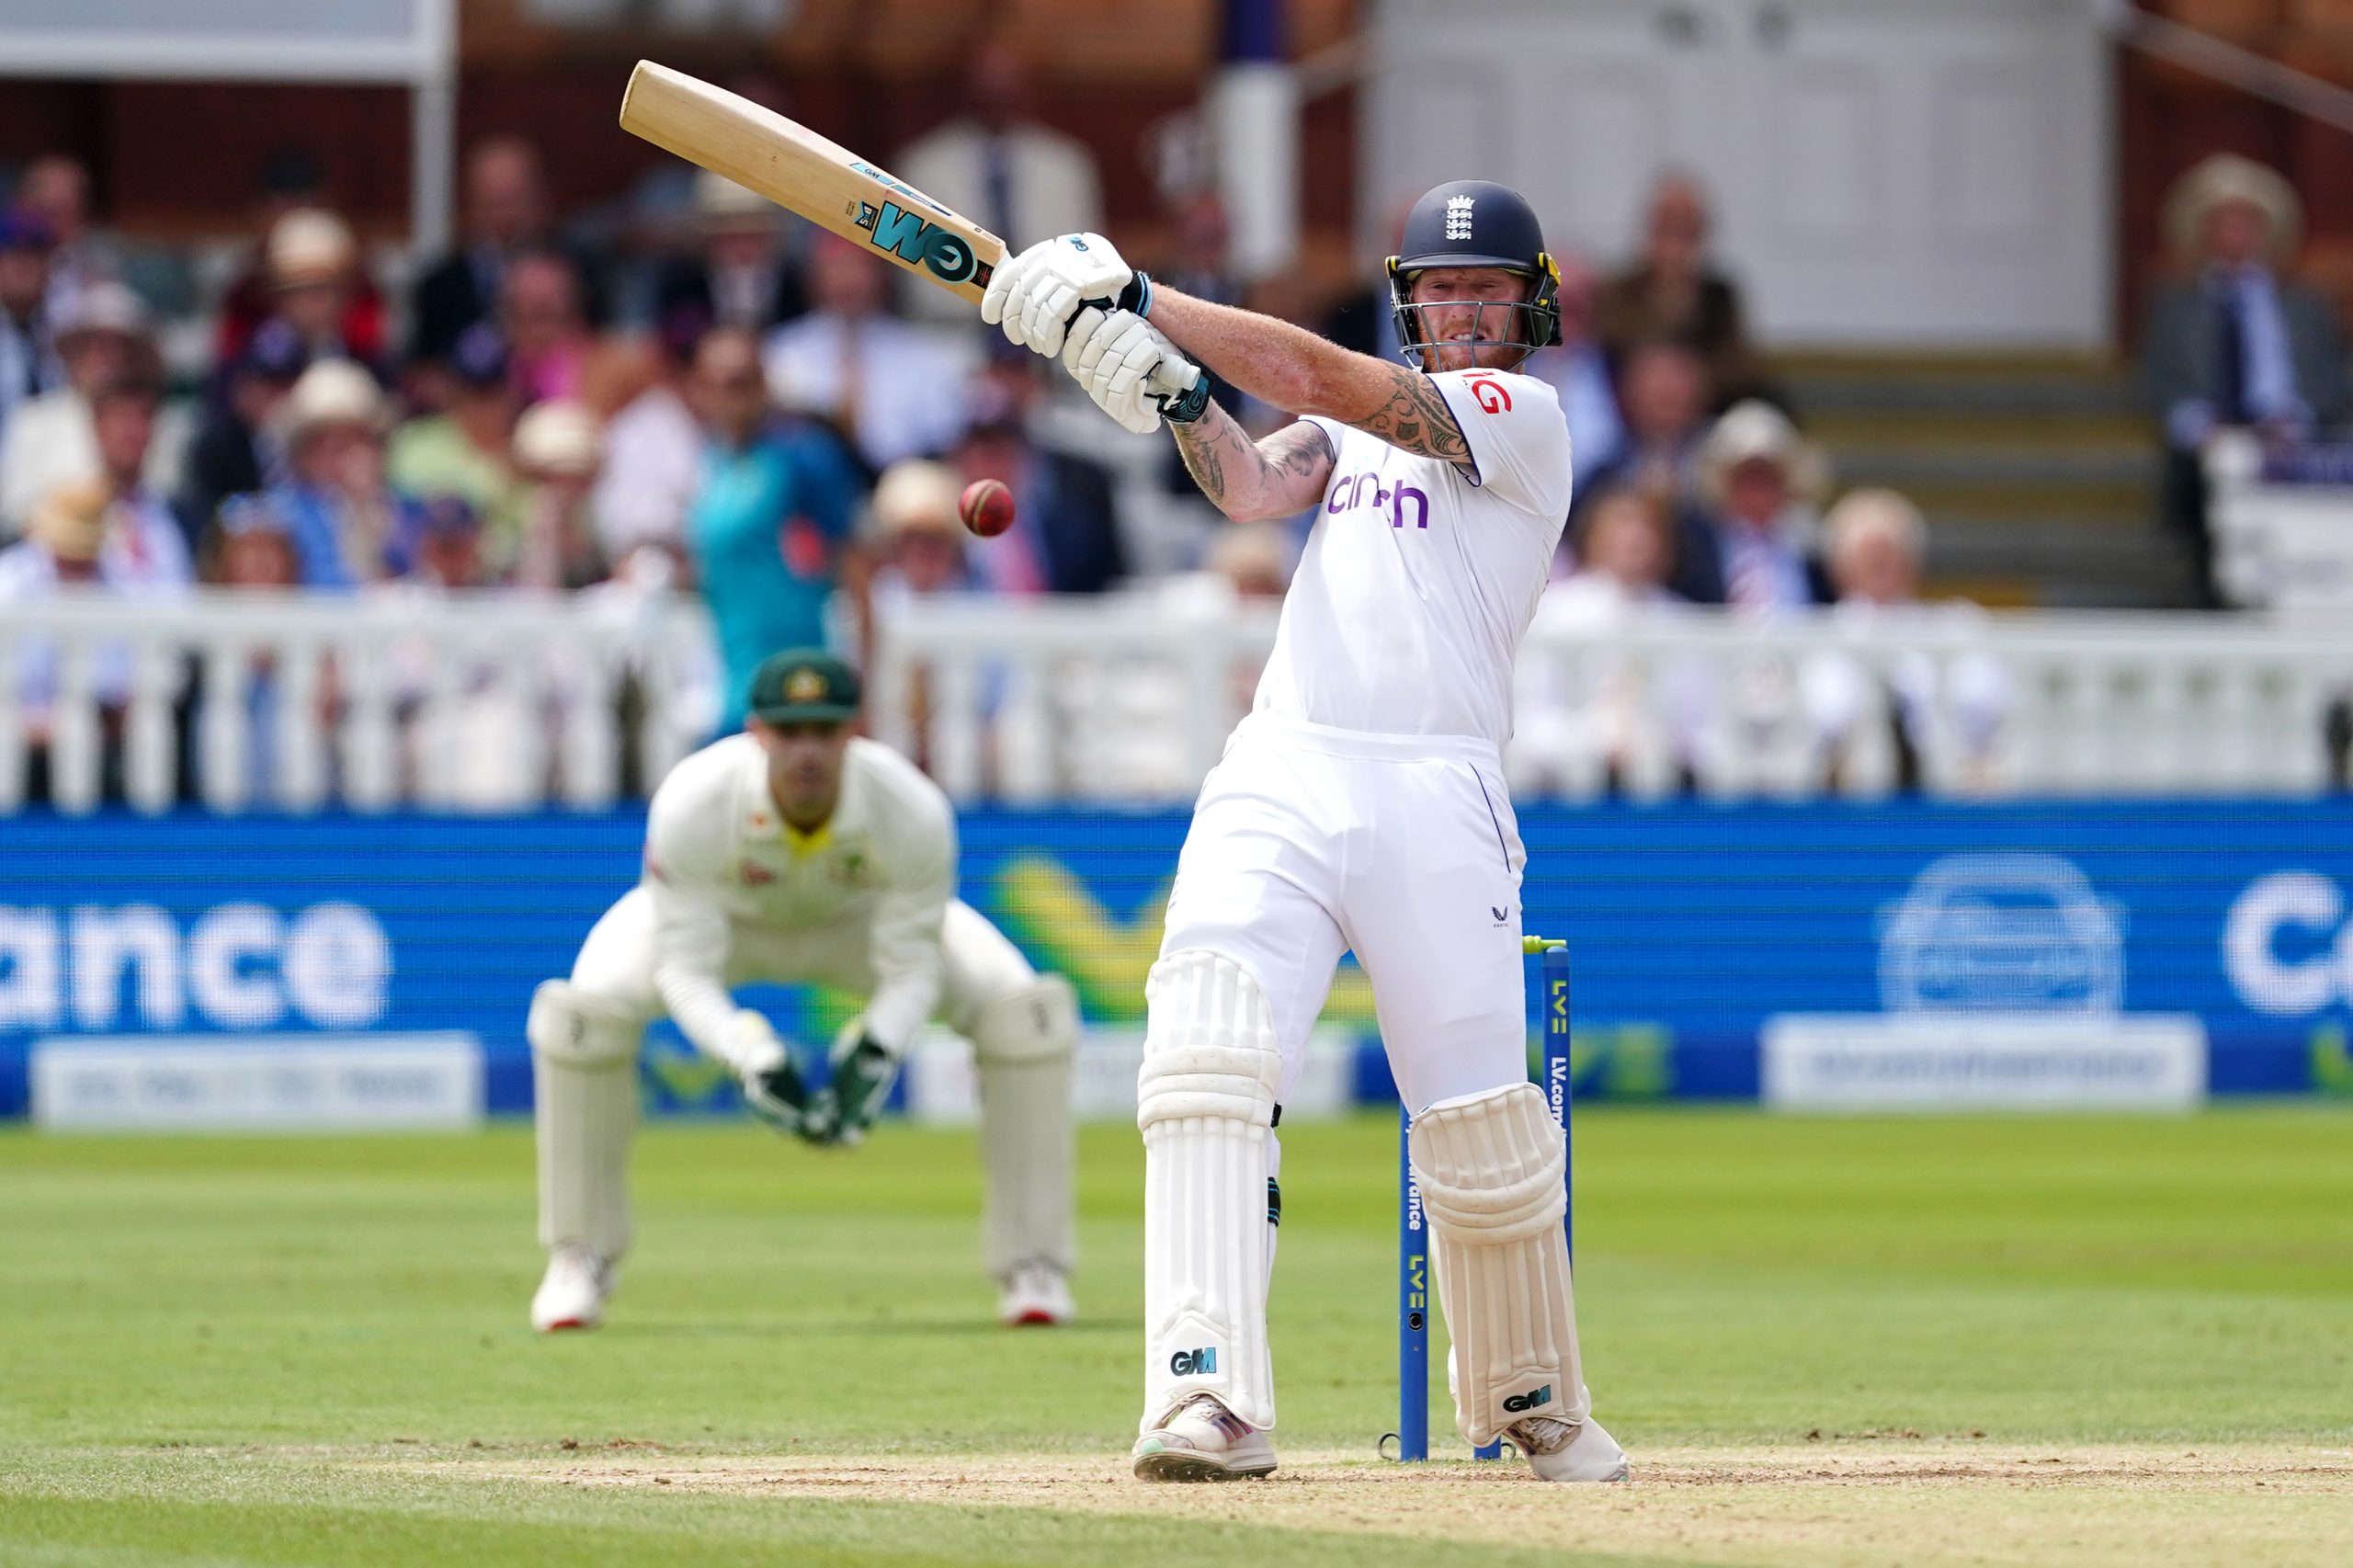 Ben Stokes ton fires England after Jonny Bairstow controversy at febrile Lord’s